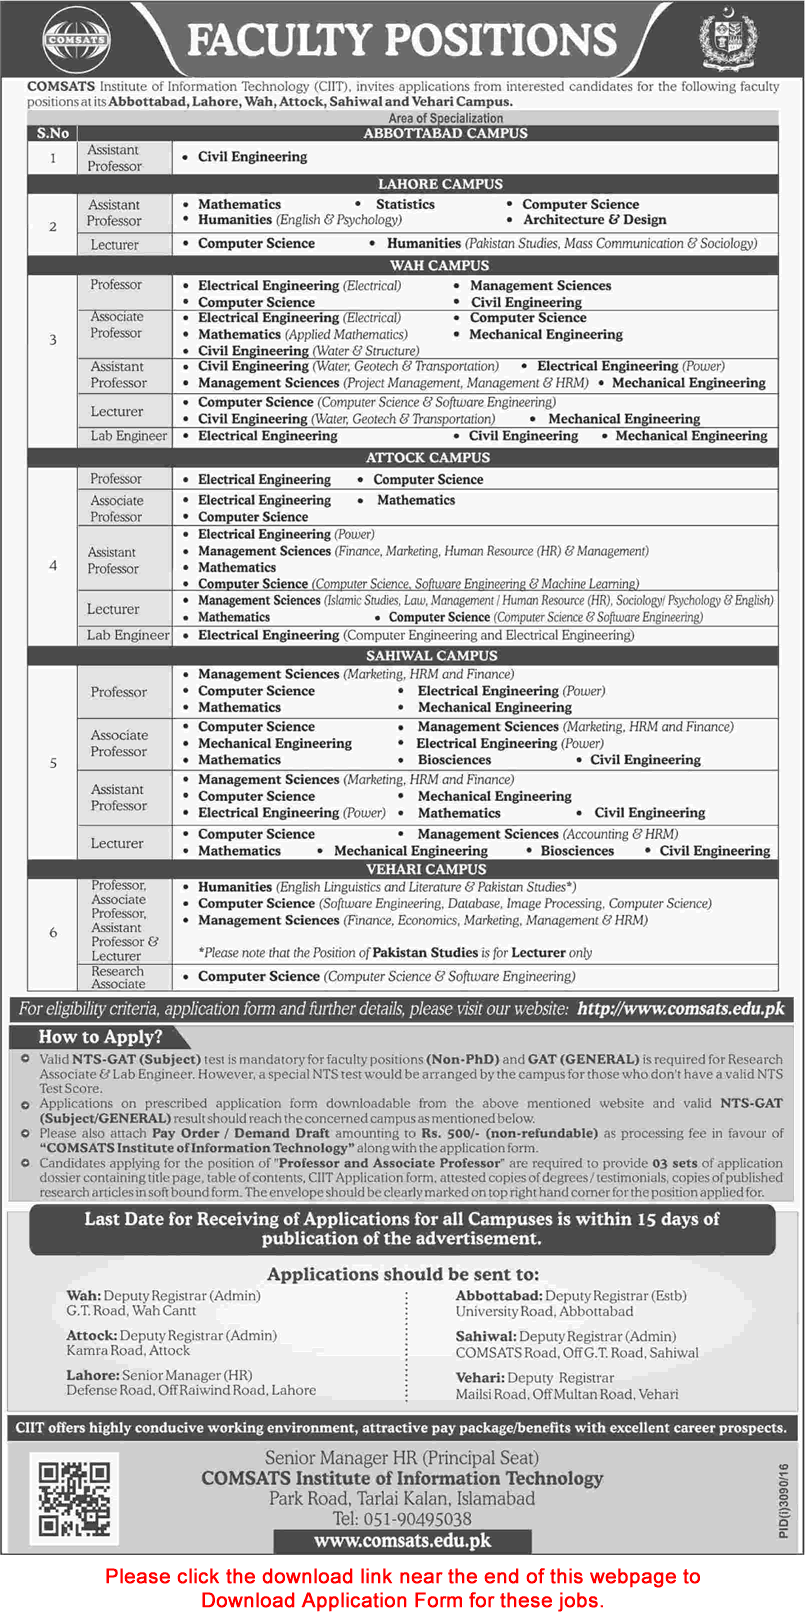 COMSATS Jobs December 2016 Application Form Teaching Faculty, Lab Engineers & Research Associate Latest